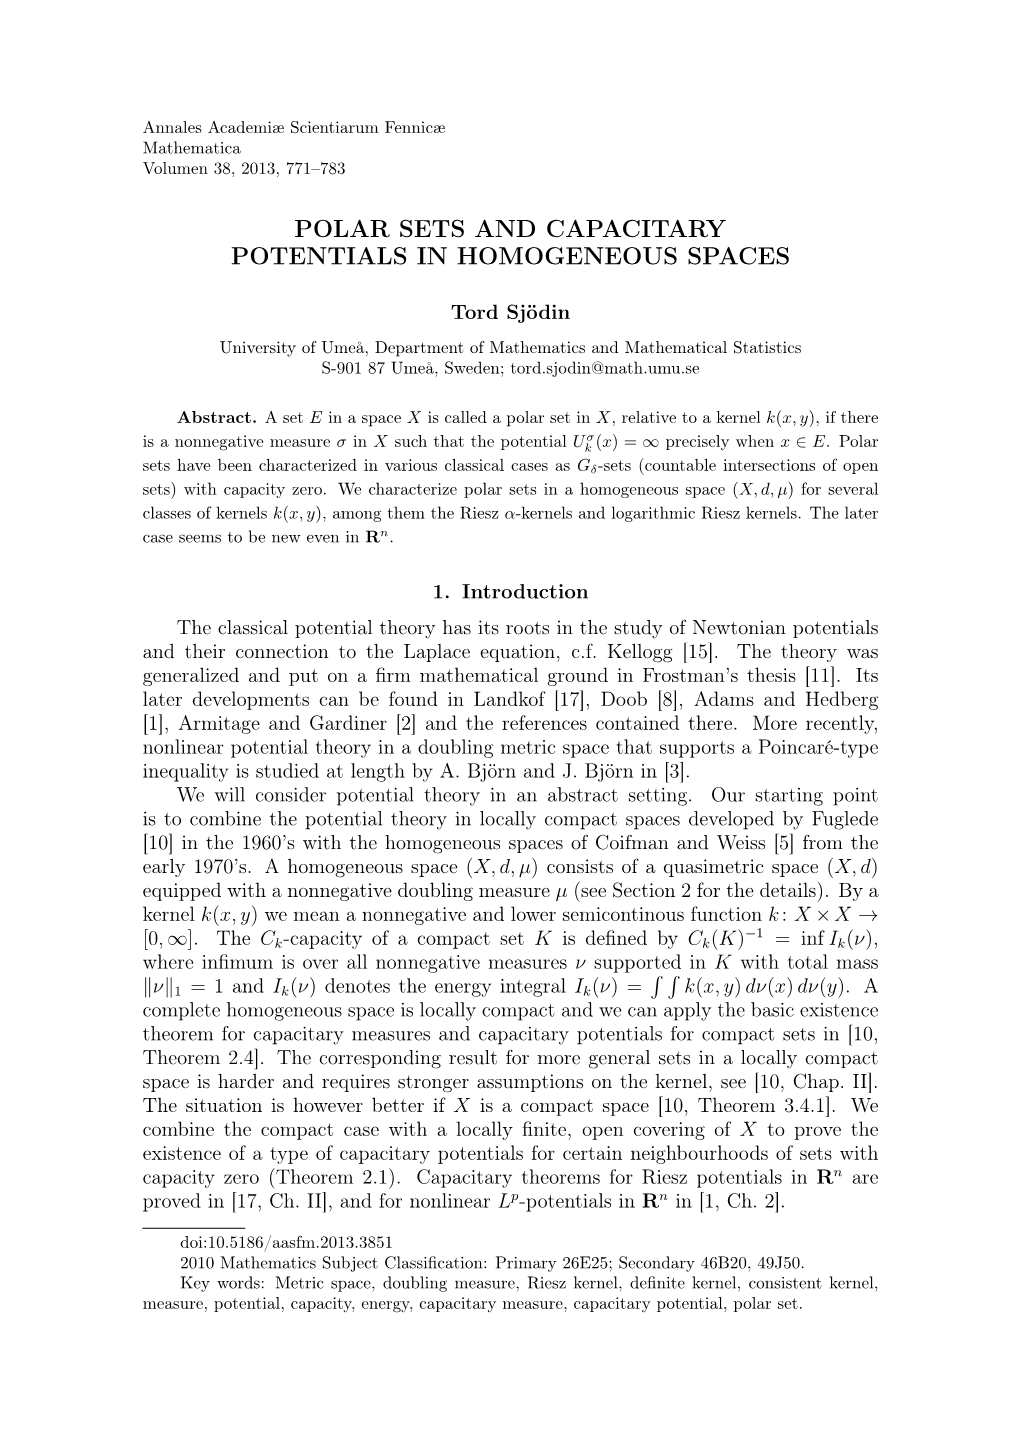 Polar Sets and Capacitary Potentials in Homogeneous Spaces